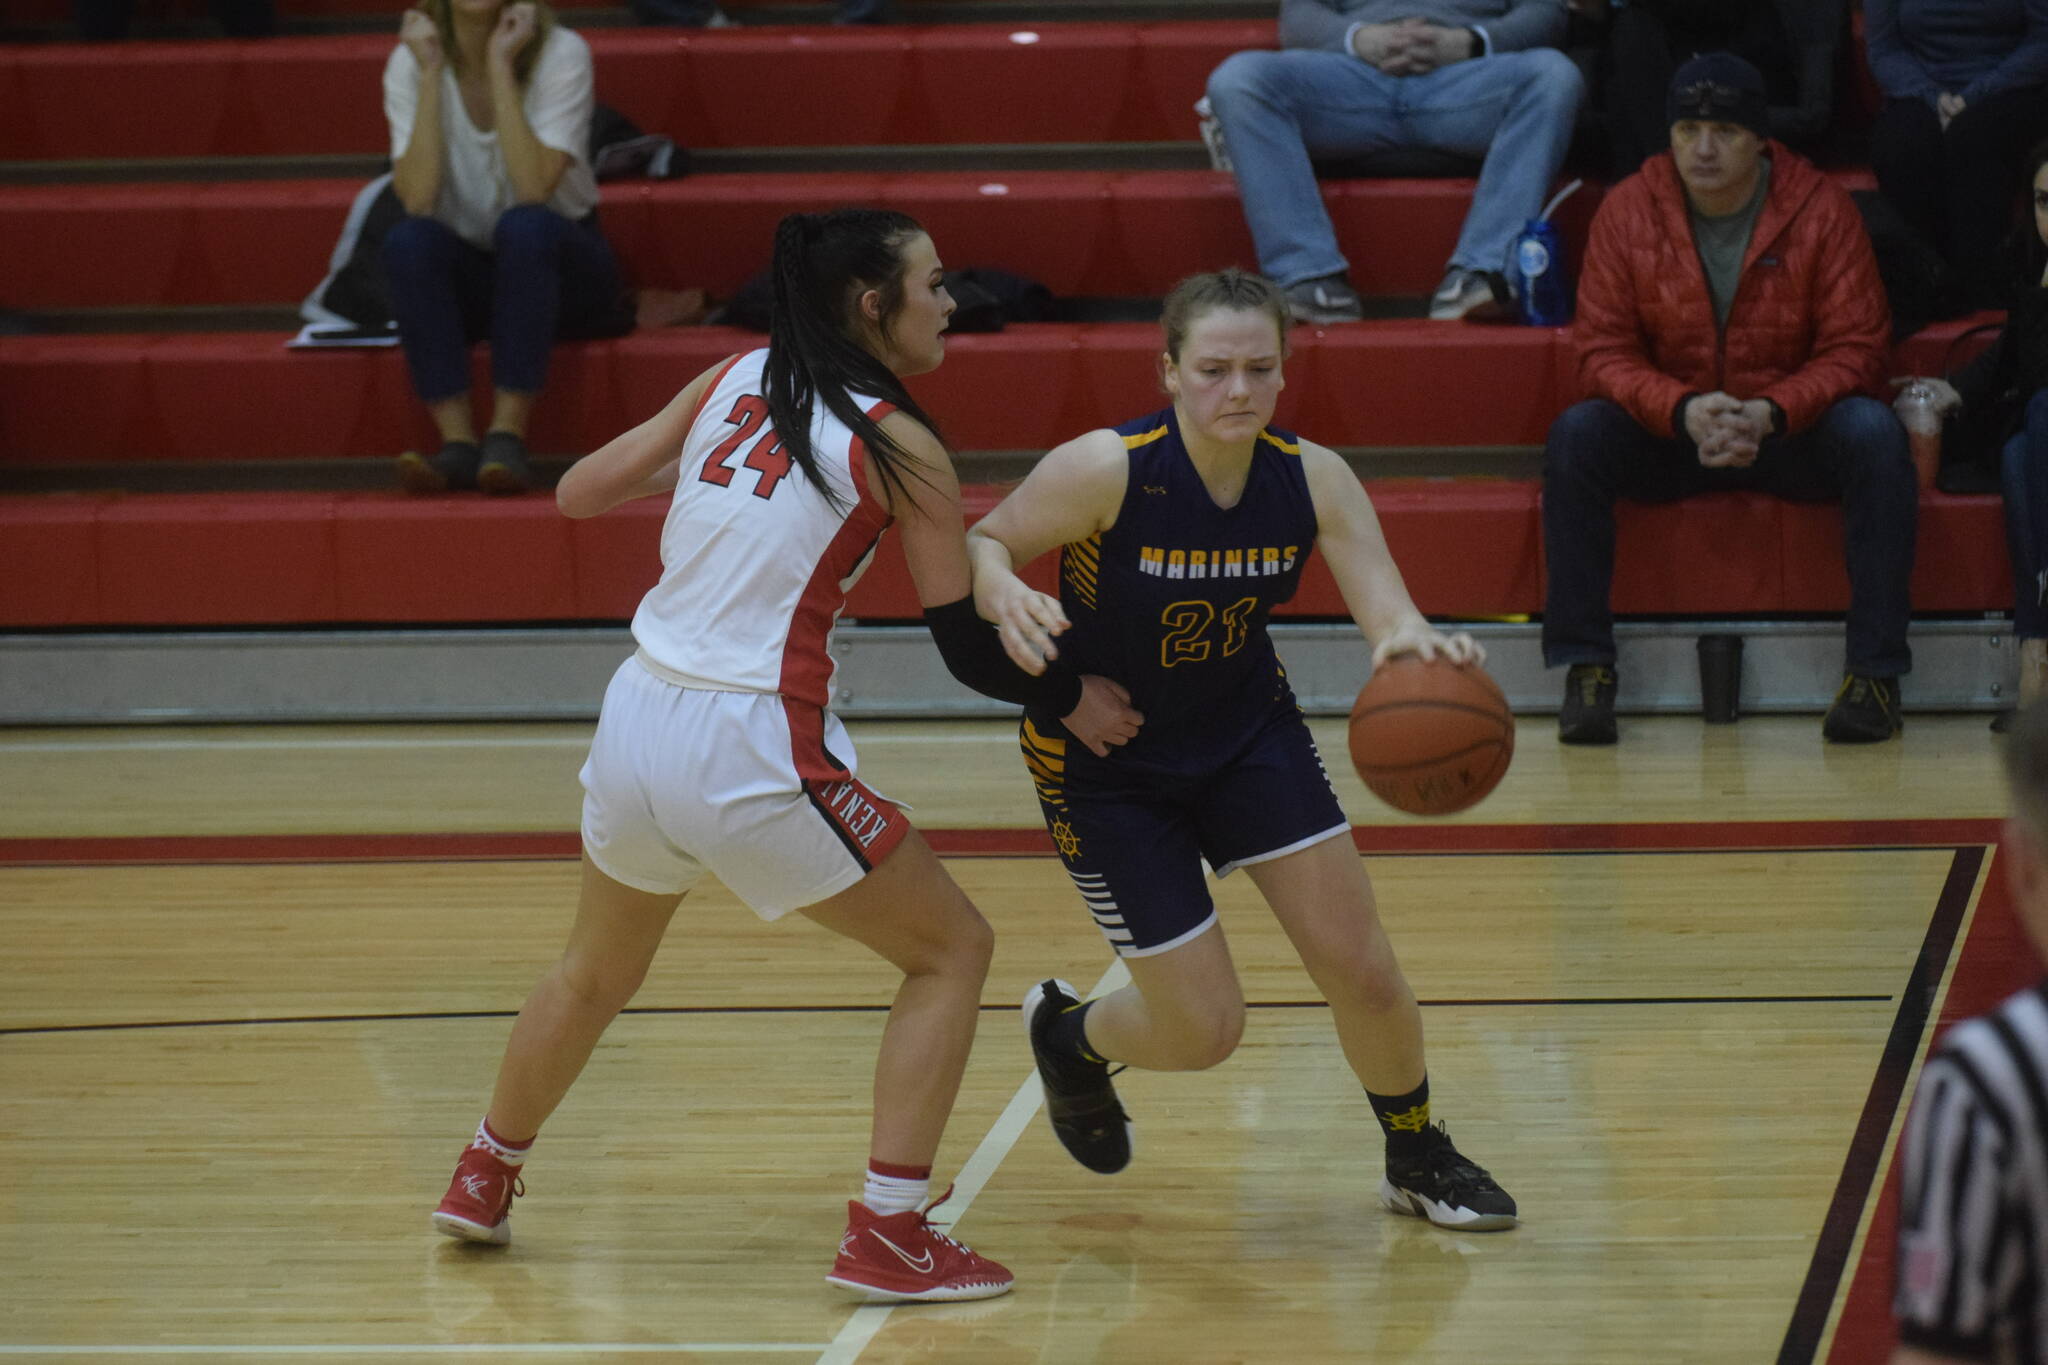 Kenai’s Amber Nash defends Homer’s Sophie Ellison during the conference game in Kenai on Saturday, Feb. 19, 2022. (Camille Botello/Peninsula Clarion)